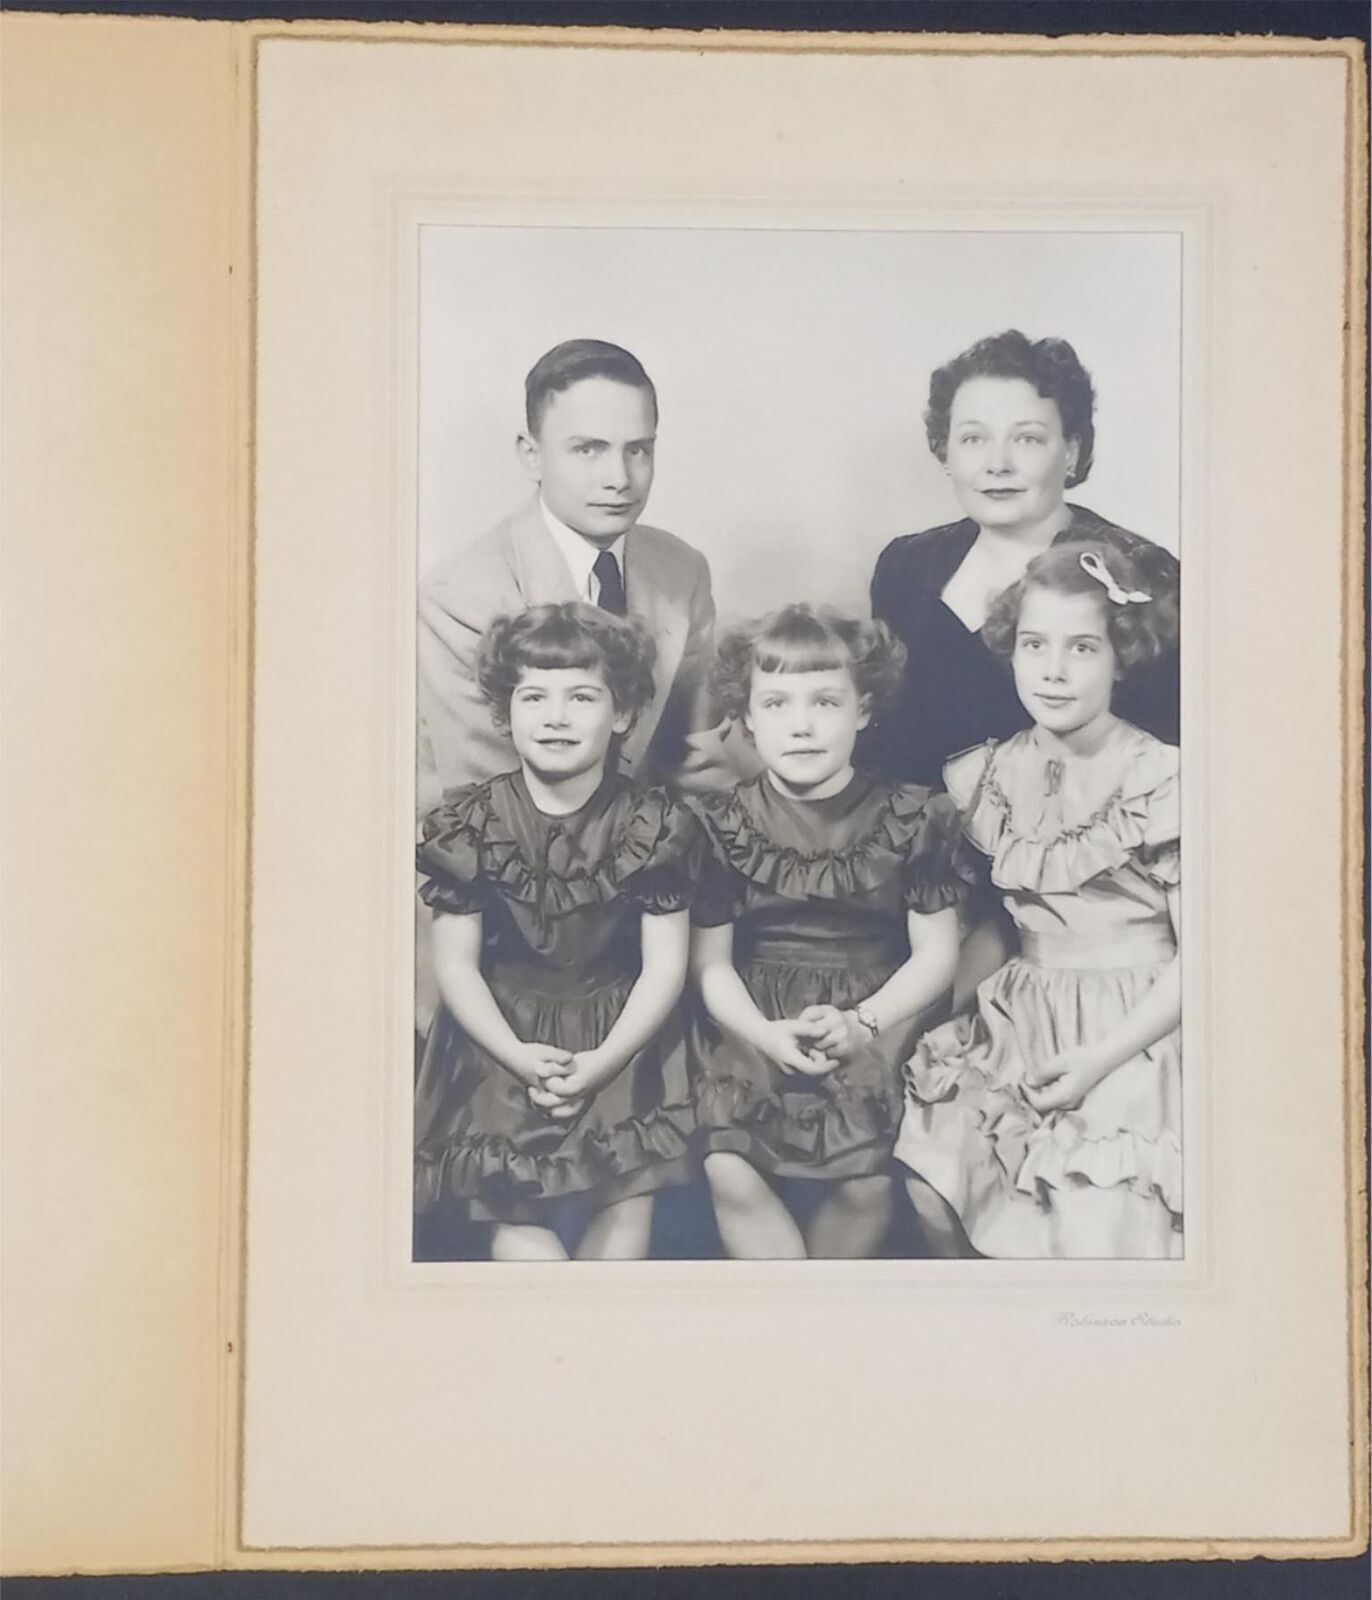 c1940 FAMILY PHOTOGRAPH MOTHER AND CHILDREN ROBINSON STUDIO PHOTOGRAPH OS1